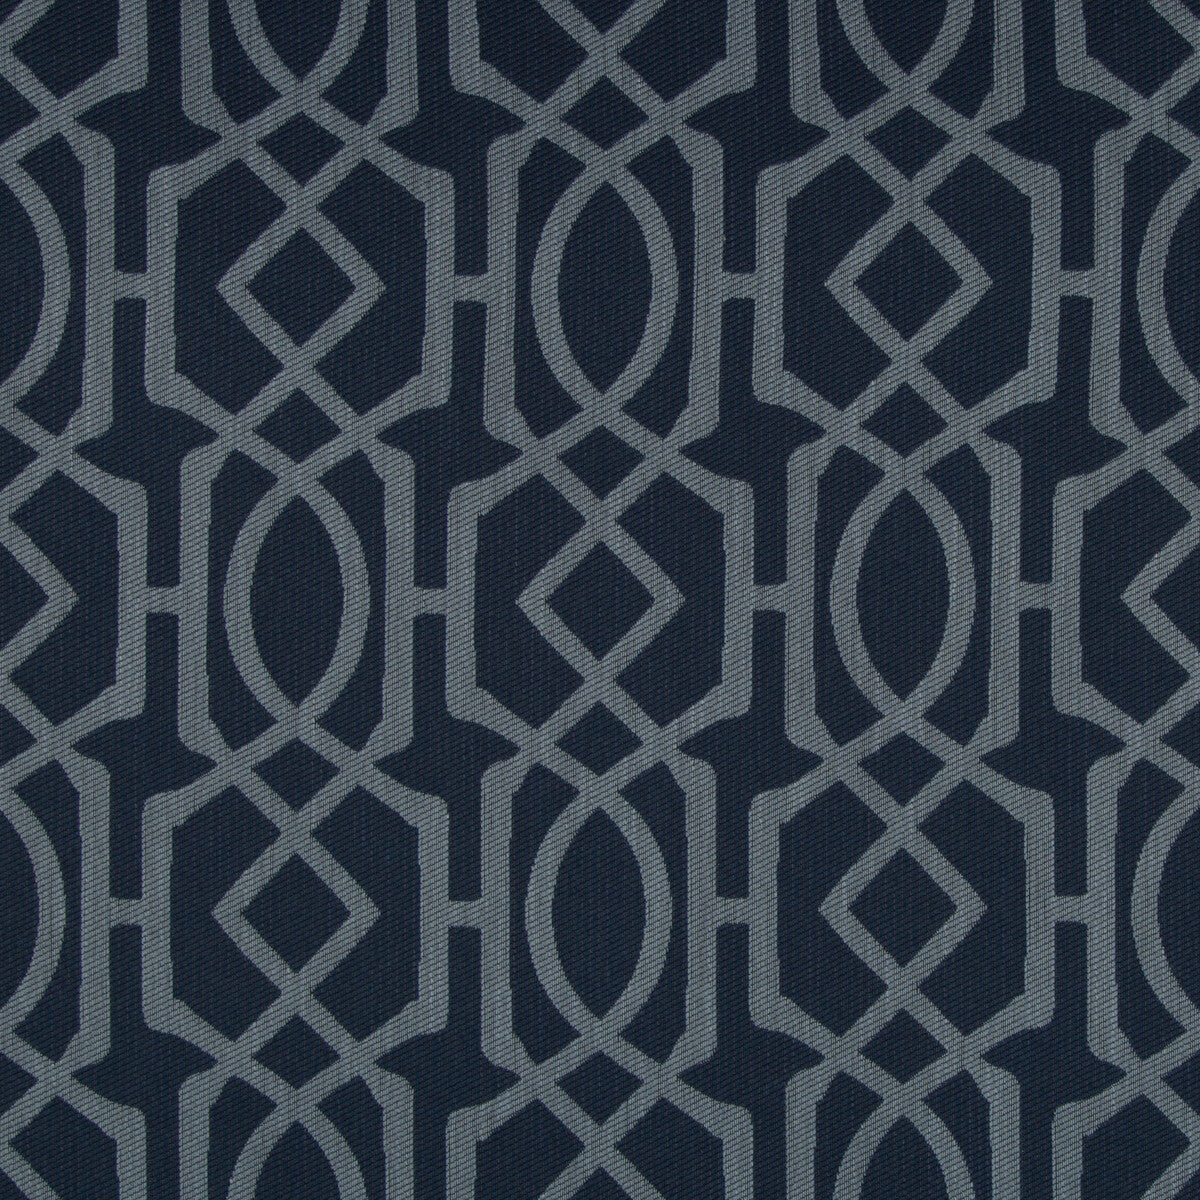 Kravet Design fabric in 34700-505 color - pattern 34700.505.0 - by Kravet Design in the Performance Crypton Home collection